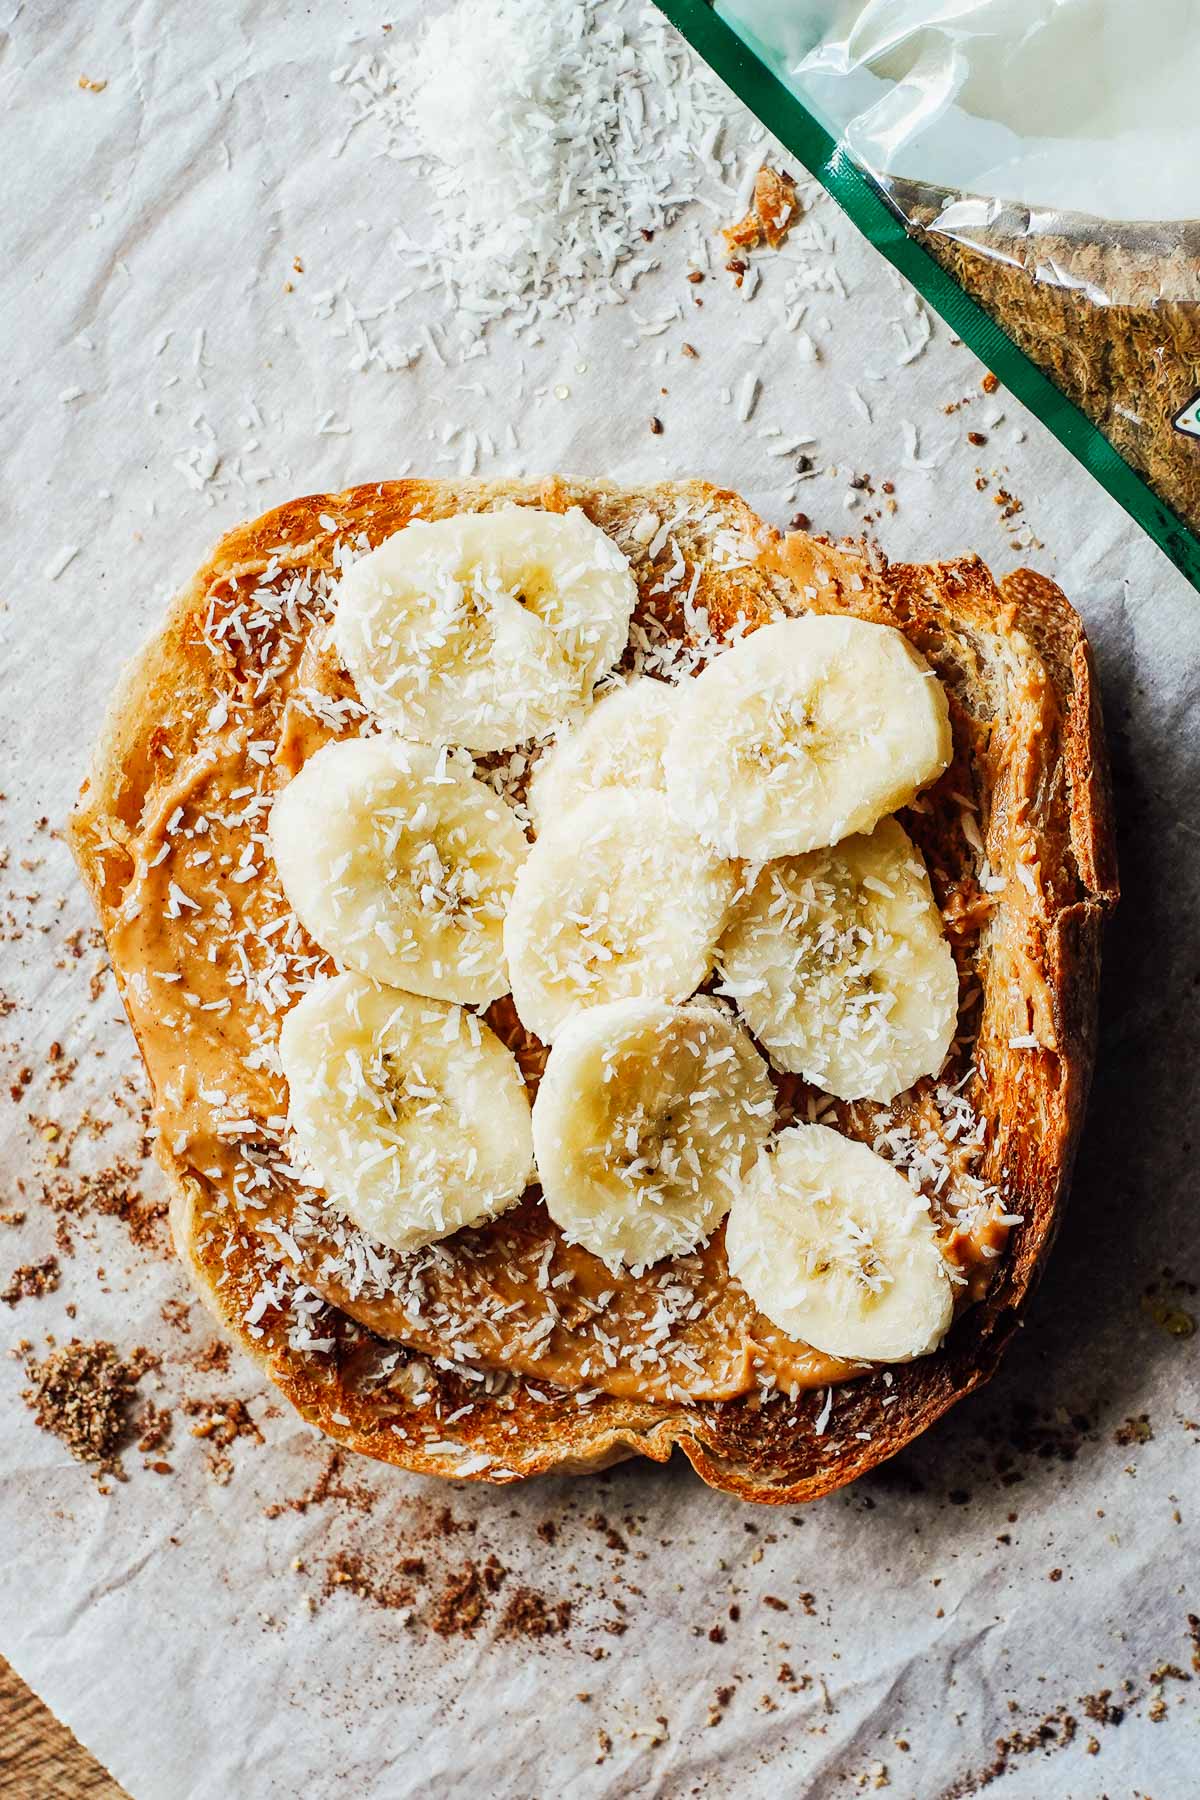 Banana slices on toast with peanut butter and coconut flakes over top.